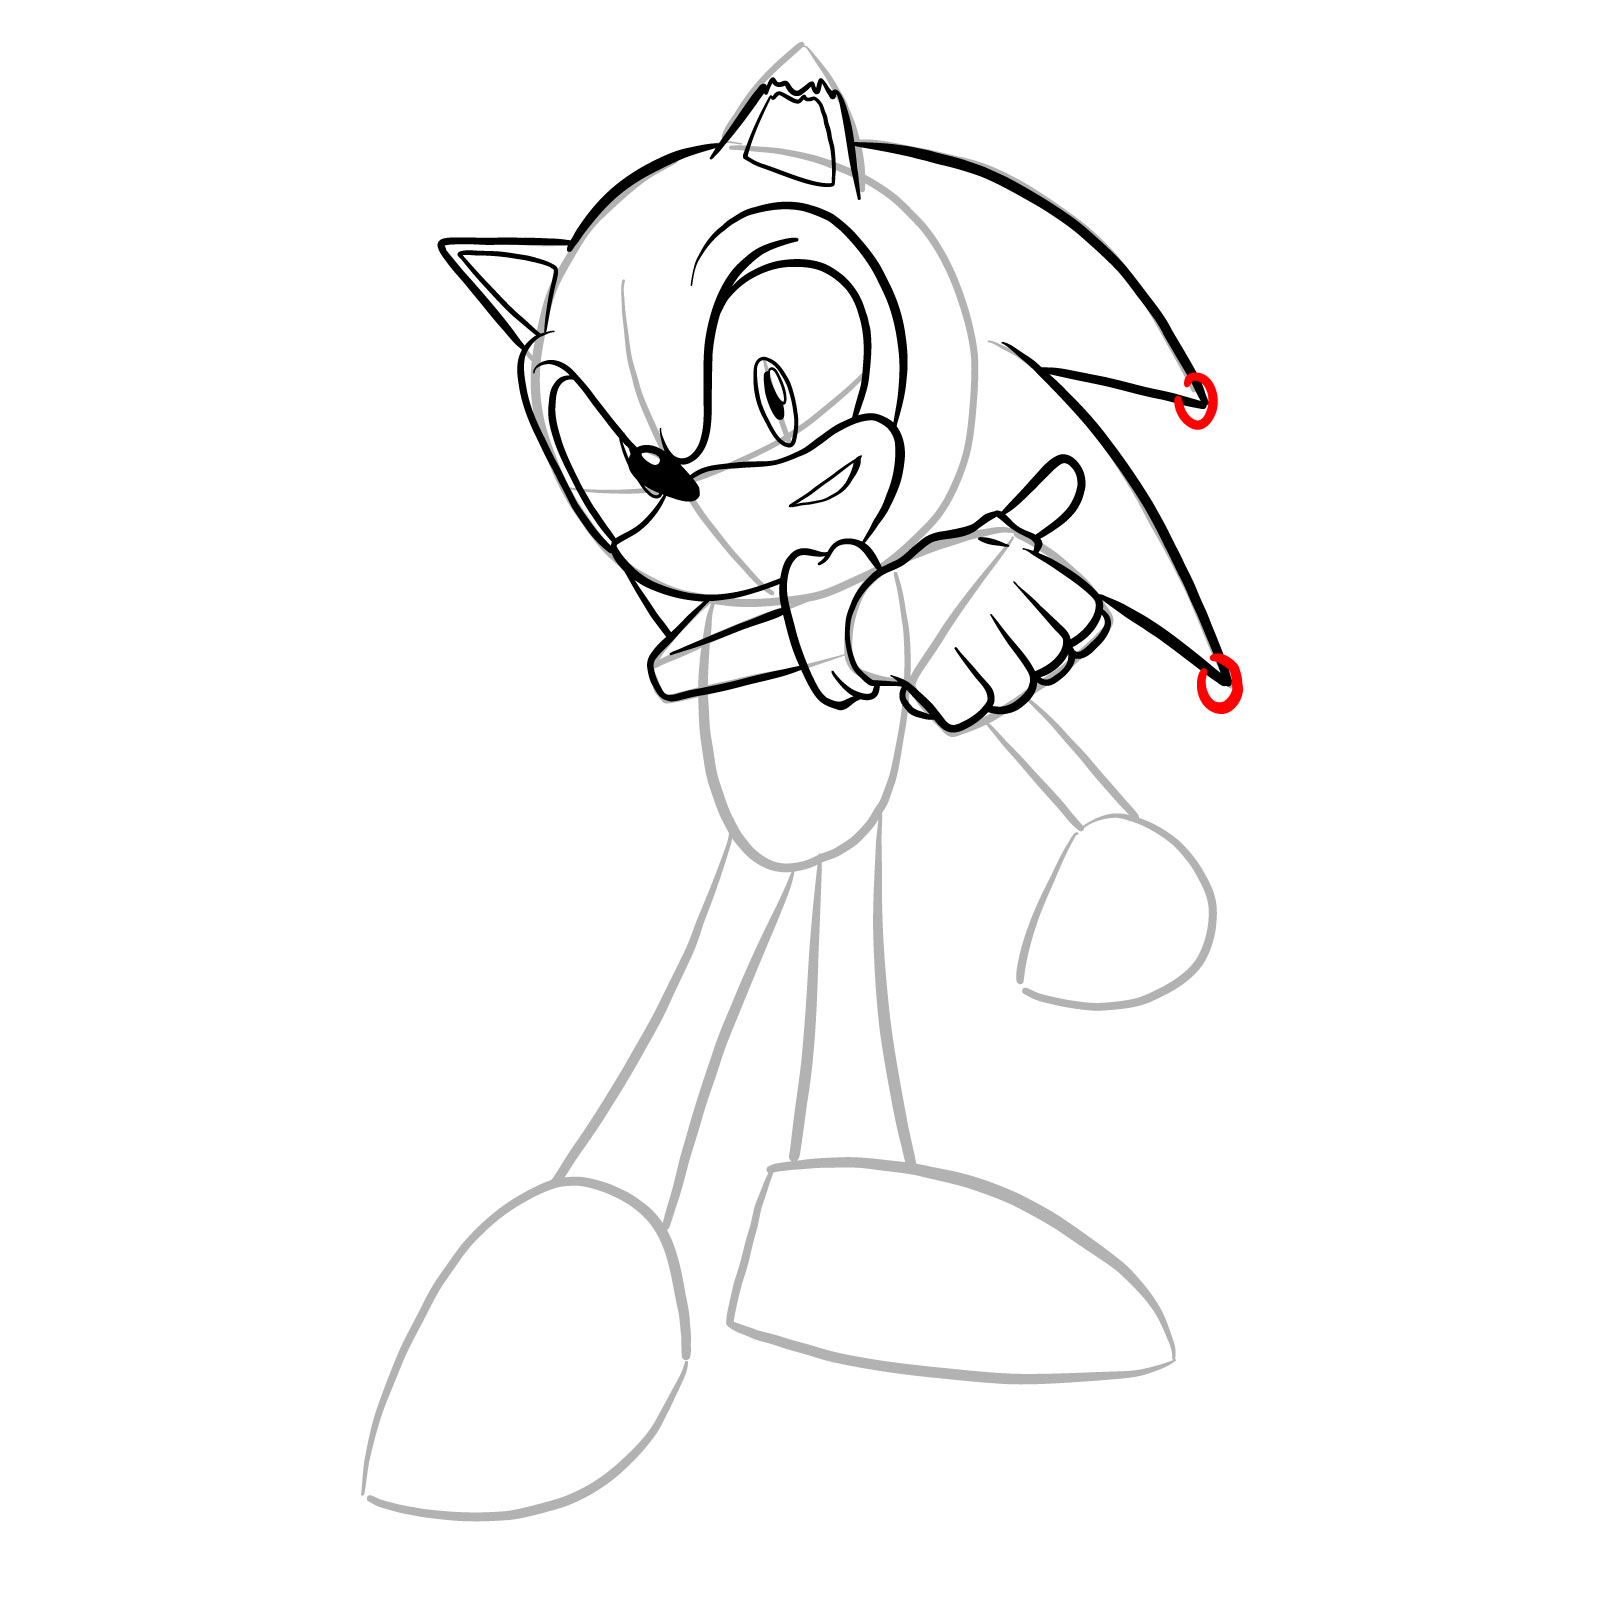 How to draw Coldsteel the Hedgehog - step 19